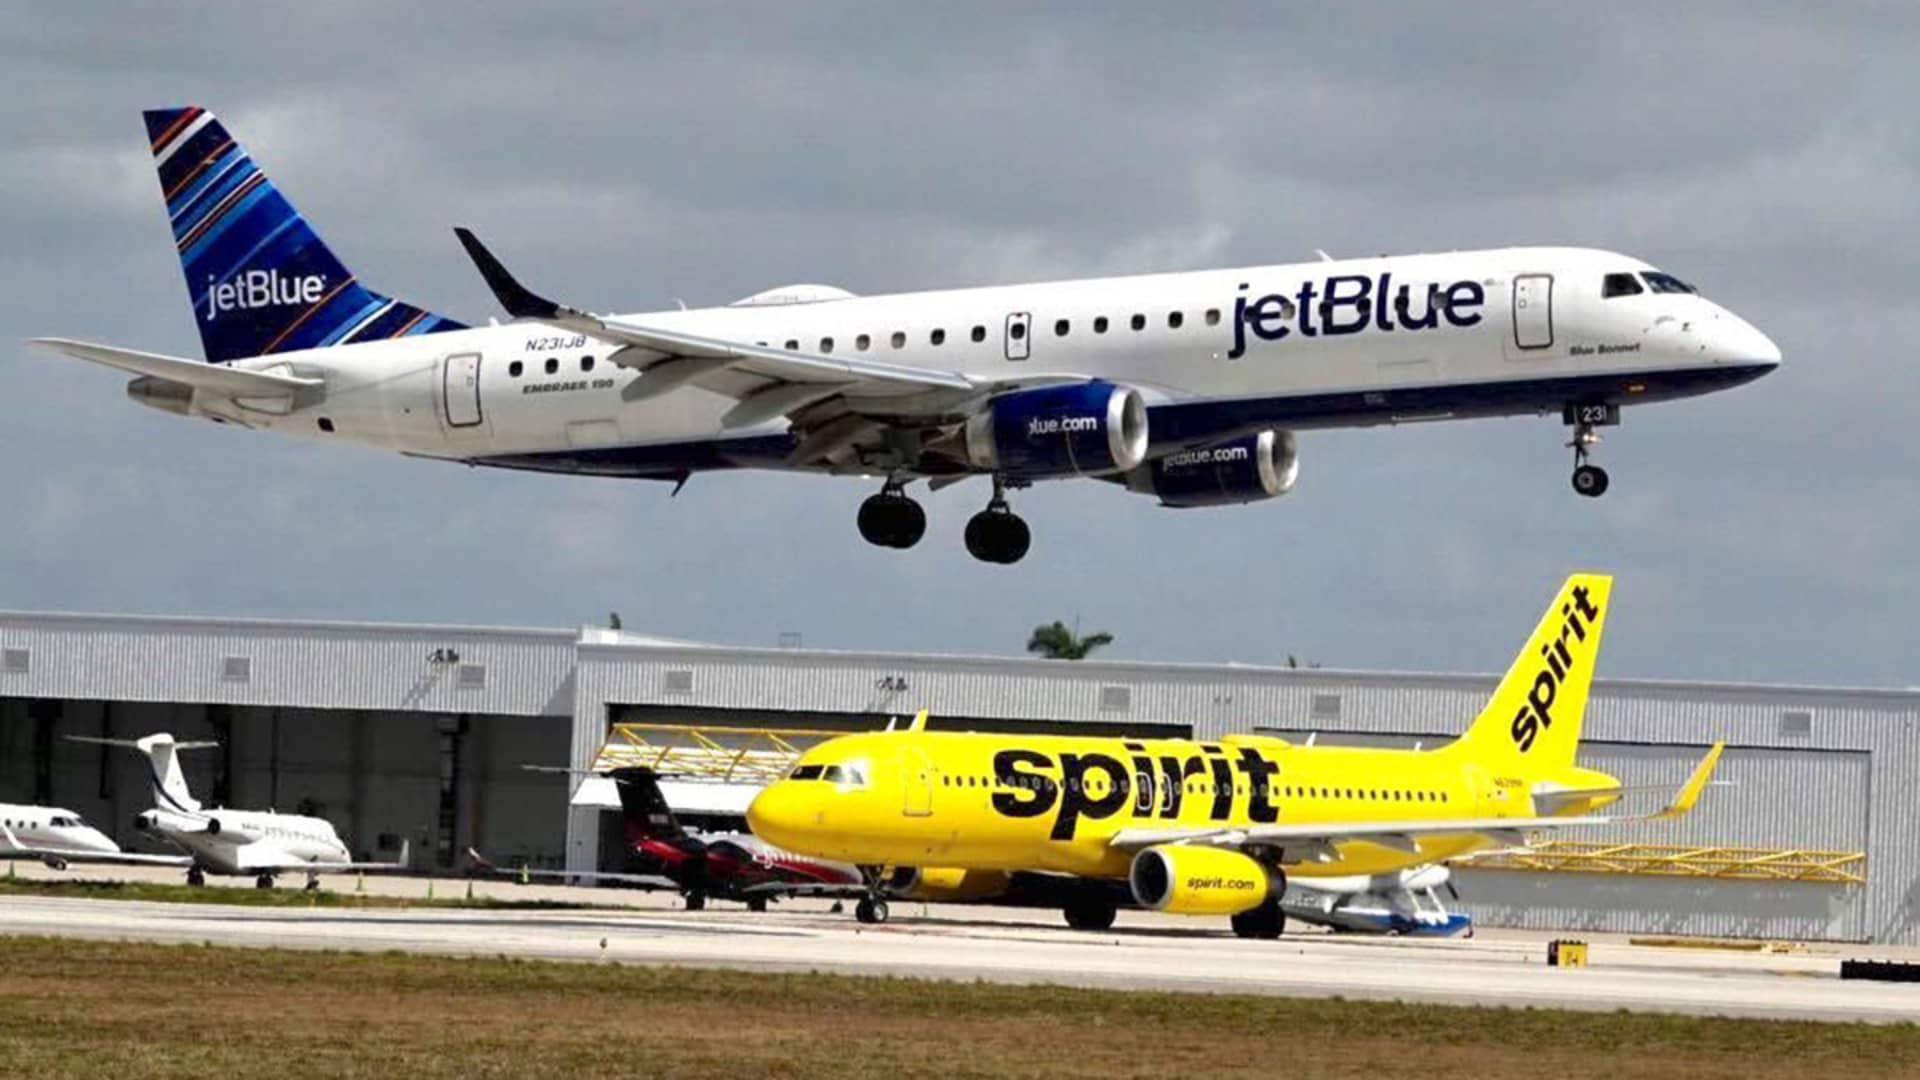 JetBlue to buy Spirit for $3.8 billion after months-long fight over discounter